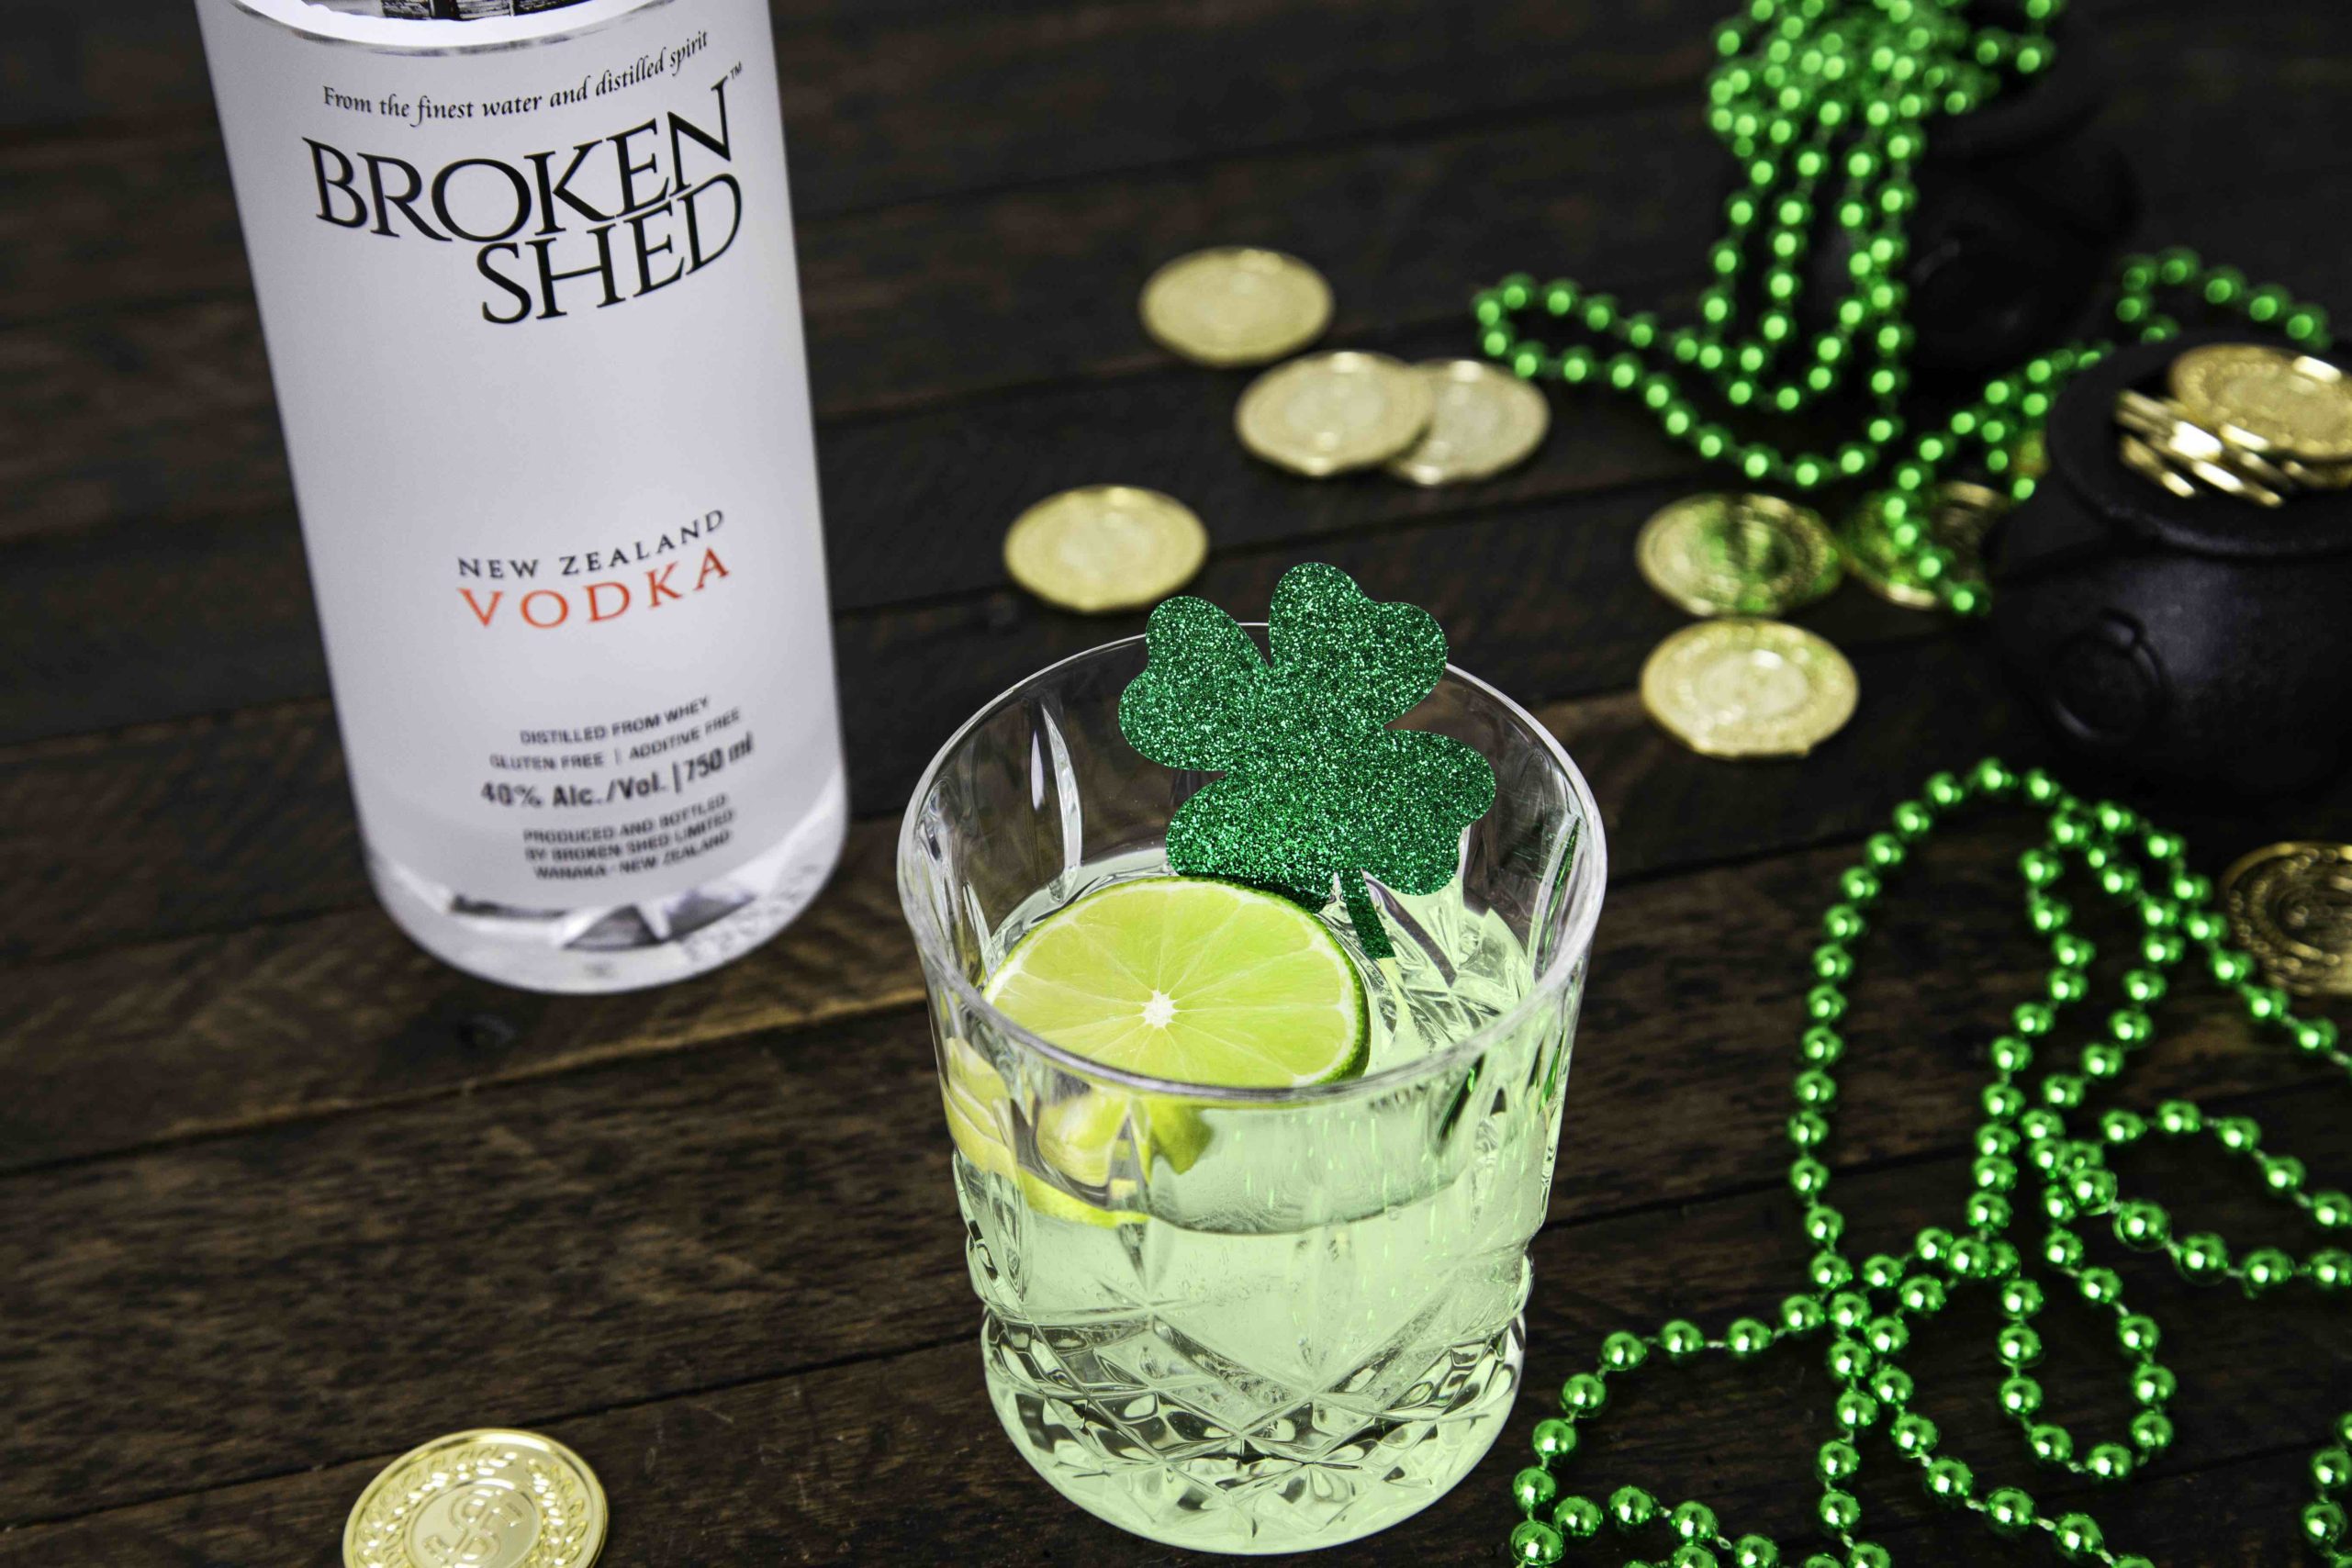 This Vodka Cocktail Is One Of the St Patrick's Day Cocktail Recipes For Home Entertaining